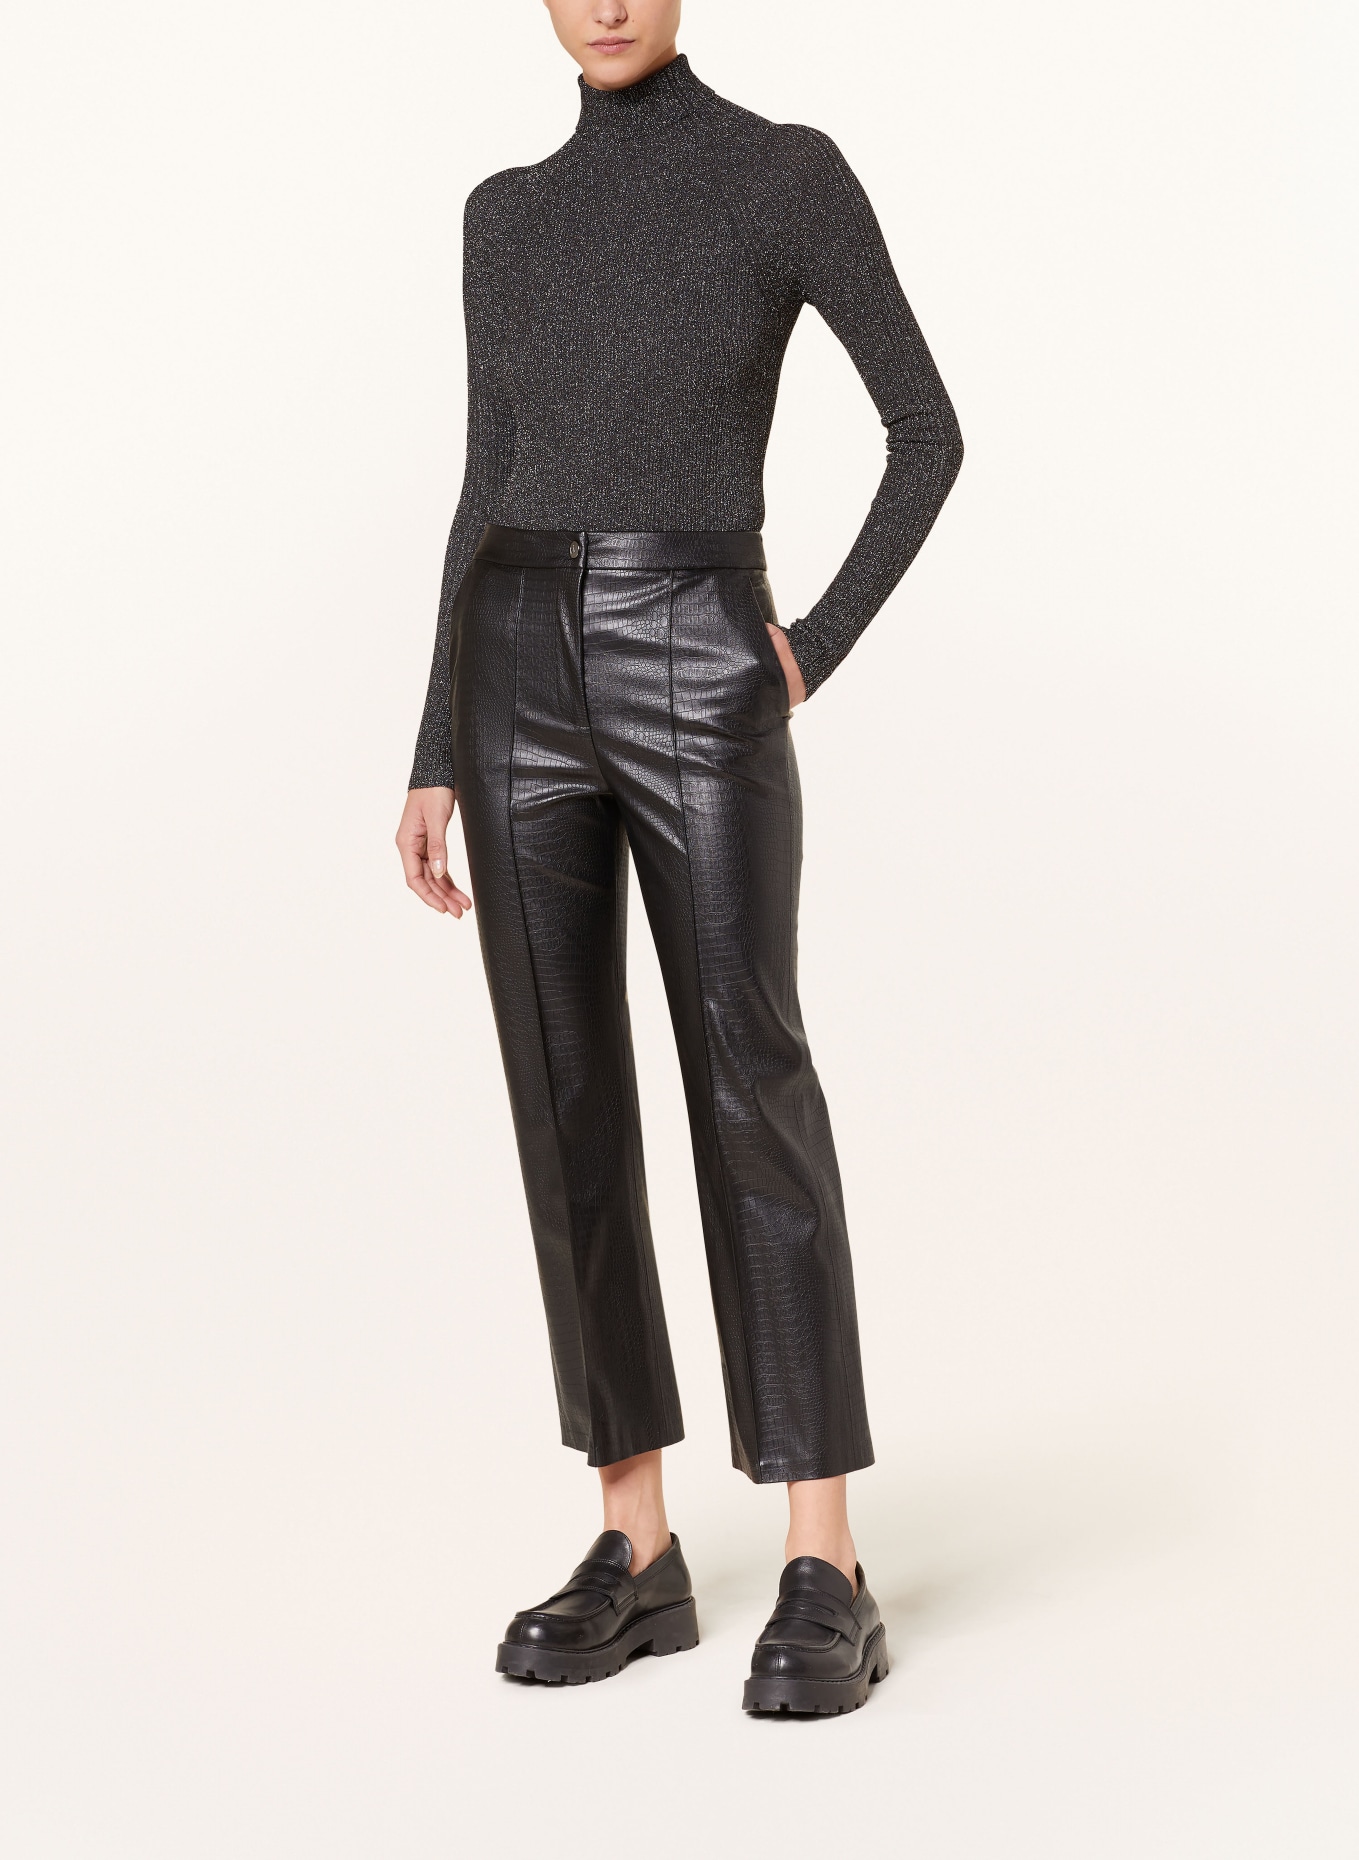 Queva faux leather flared pants in black - Max Mara